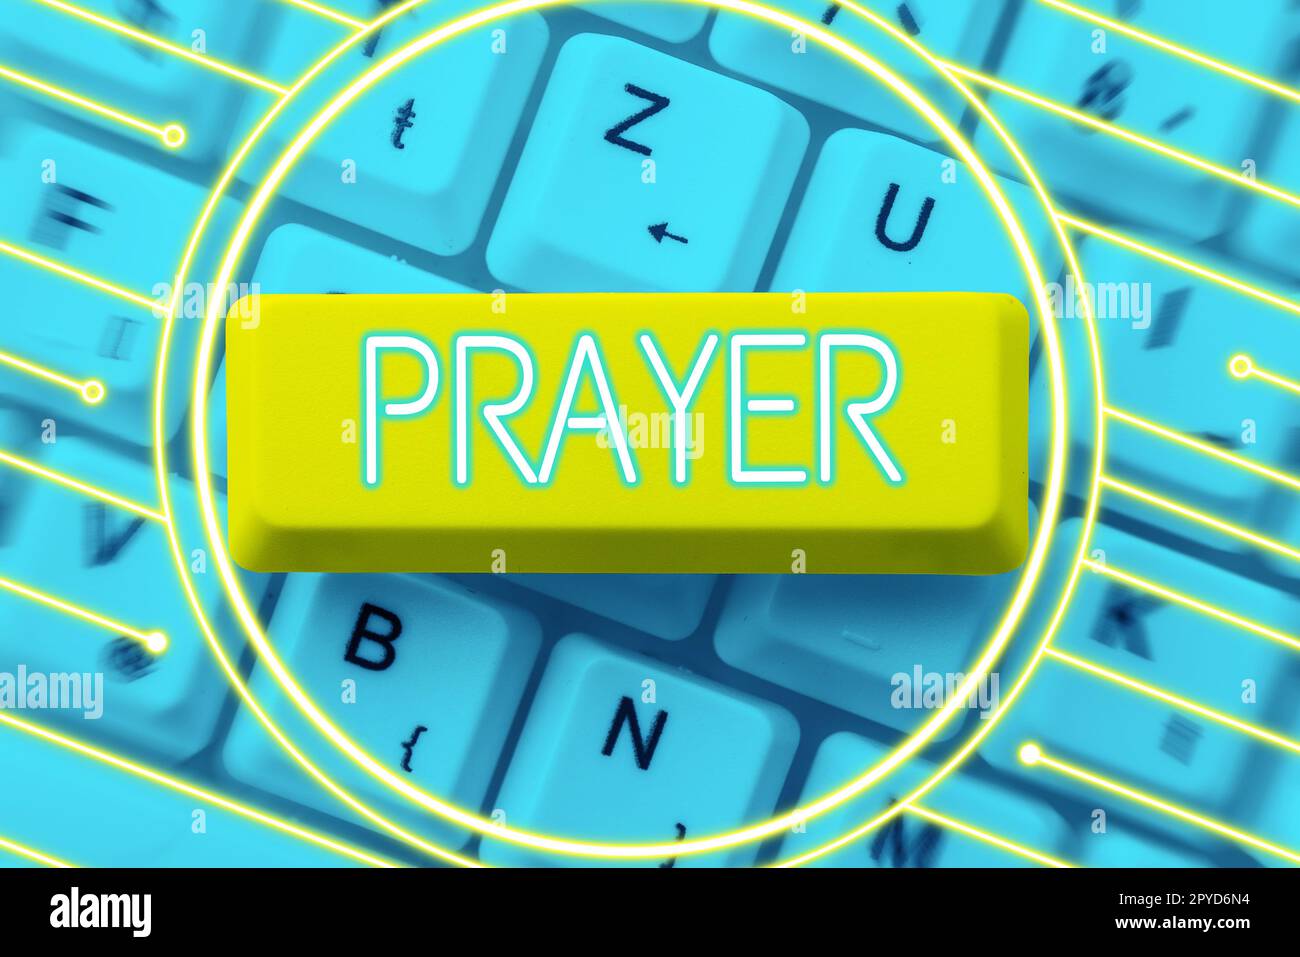 Sign displaying Prayer. Concept meaning solemn request for help or expression of thanks addressed to God Stock Photo